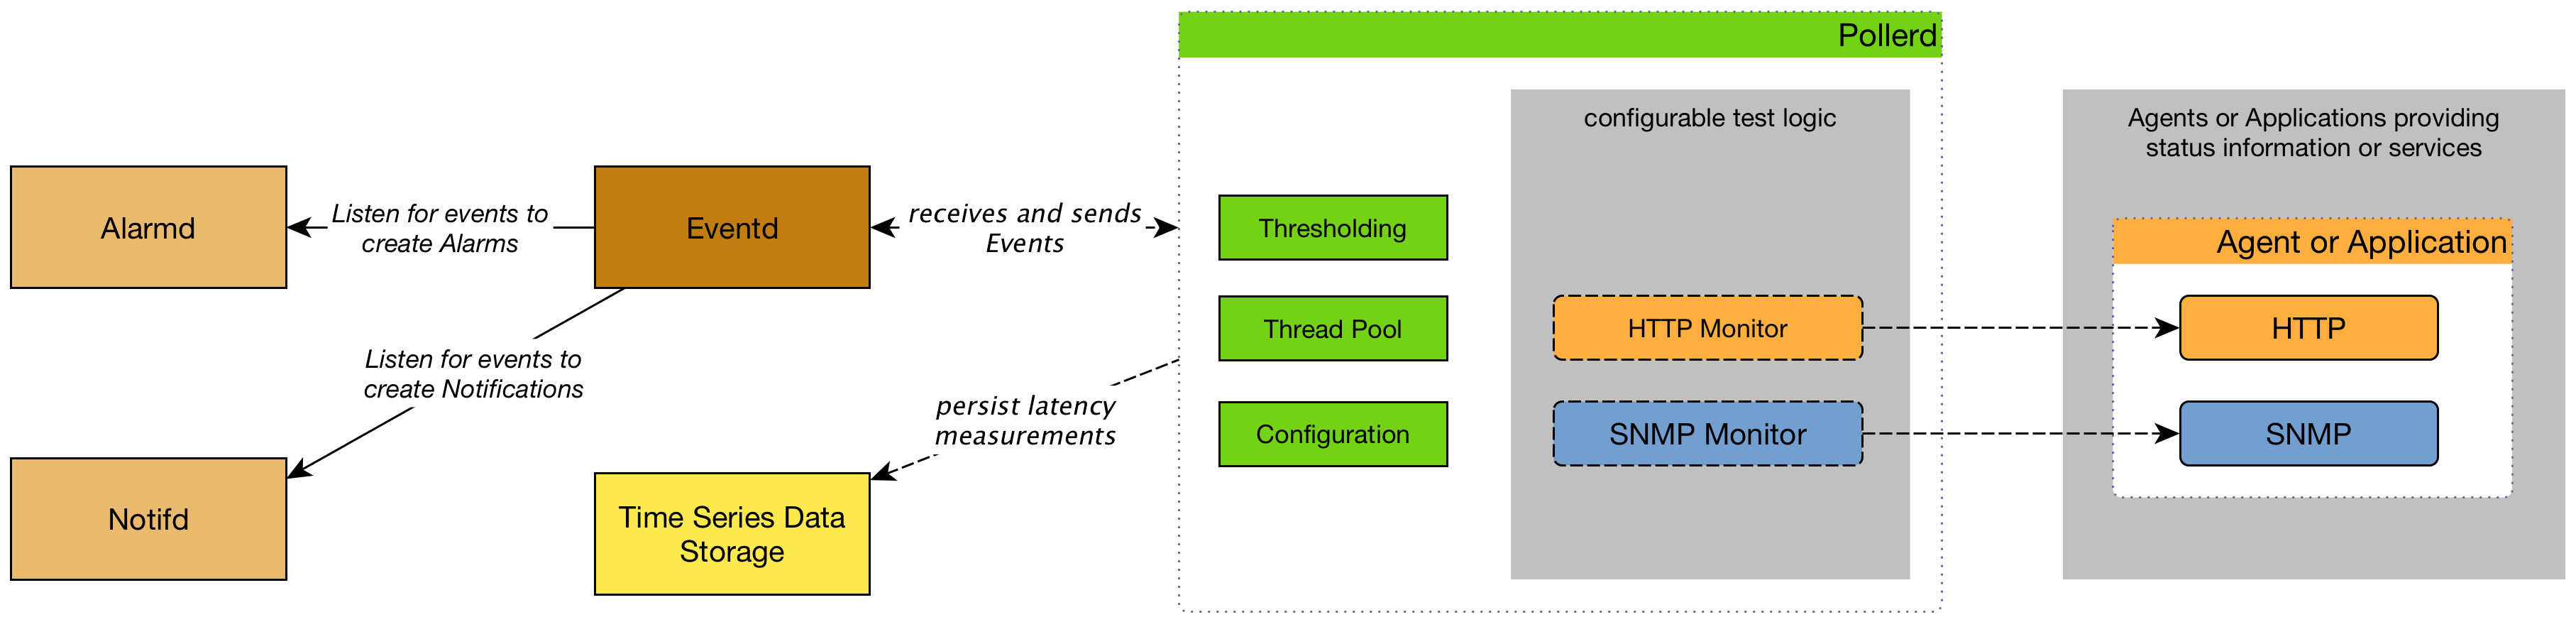 Network architecture diagram showing relationships between pollerd and Horizon components